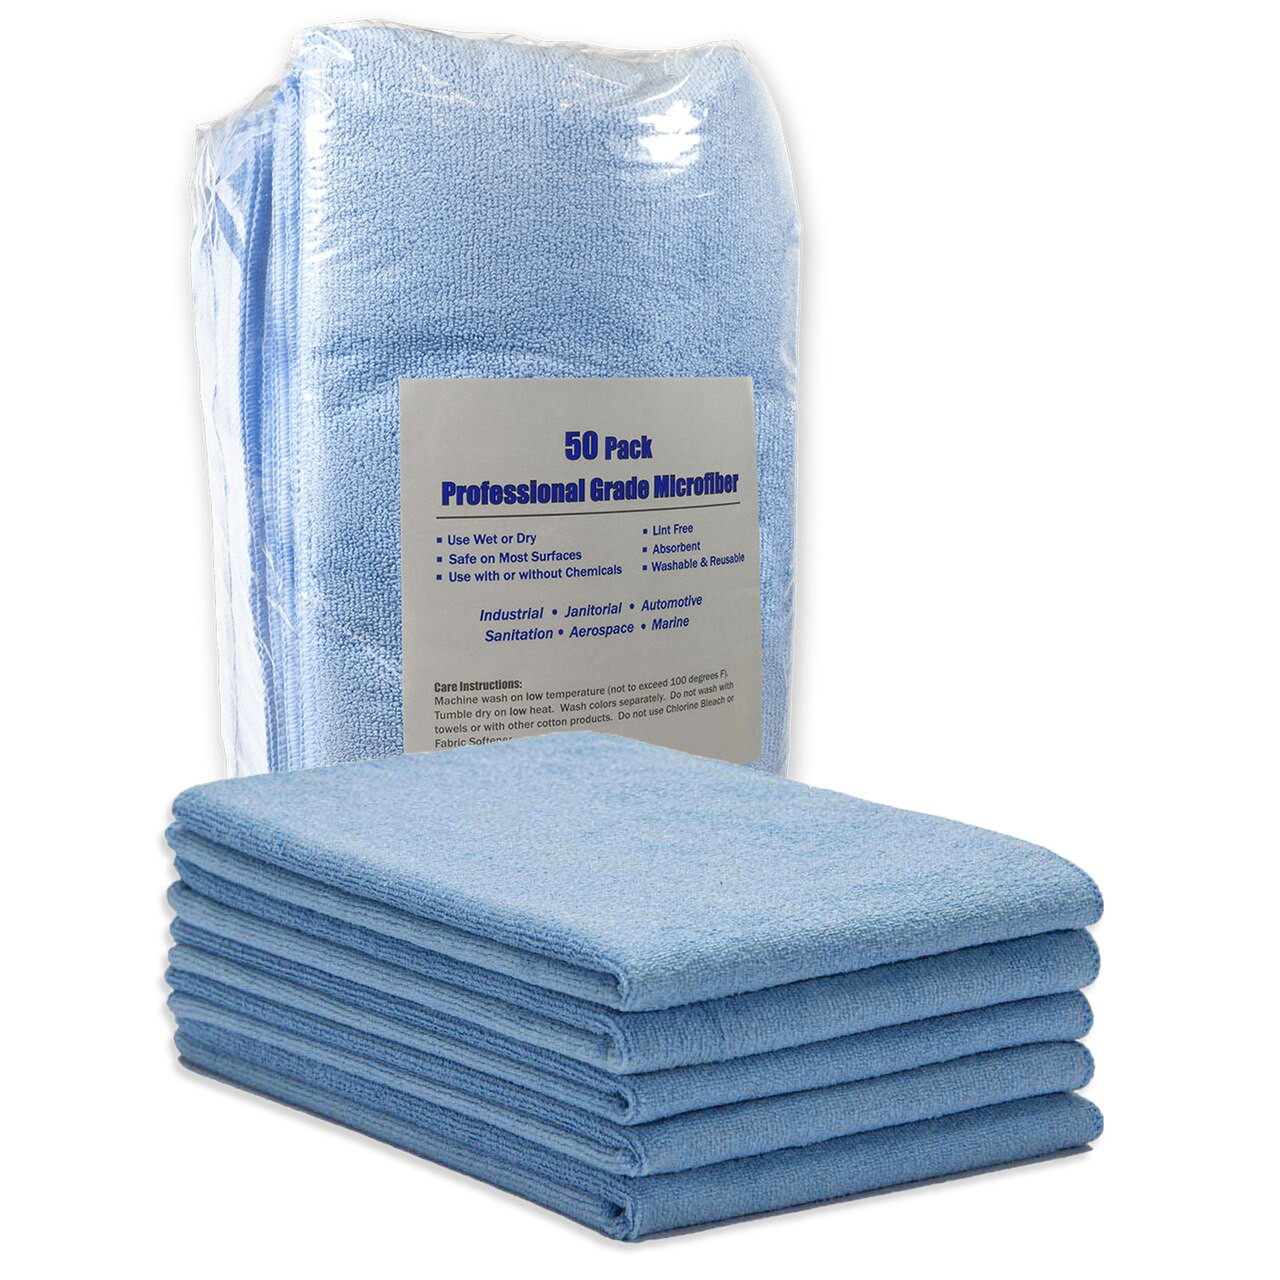 https://cdn11.bigcommerce.com/s-a5uwe4c7wz/images/stencil/1280x1280/products/895/2199/Microfiber-Towels-50PK-And-Stack-16x24-Blue__79932.1587149013.1280.1280__74048.1619641673.jpg?c=1